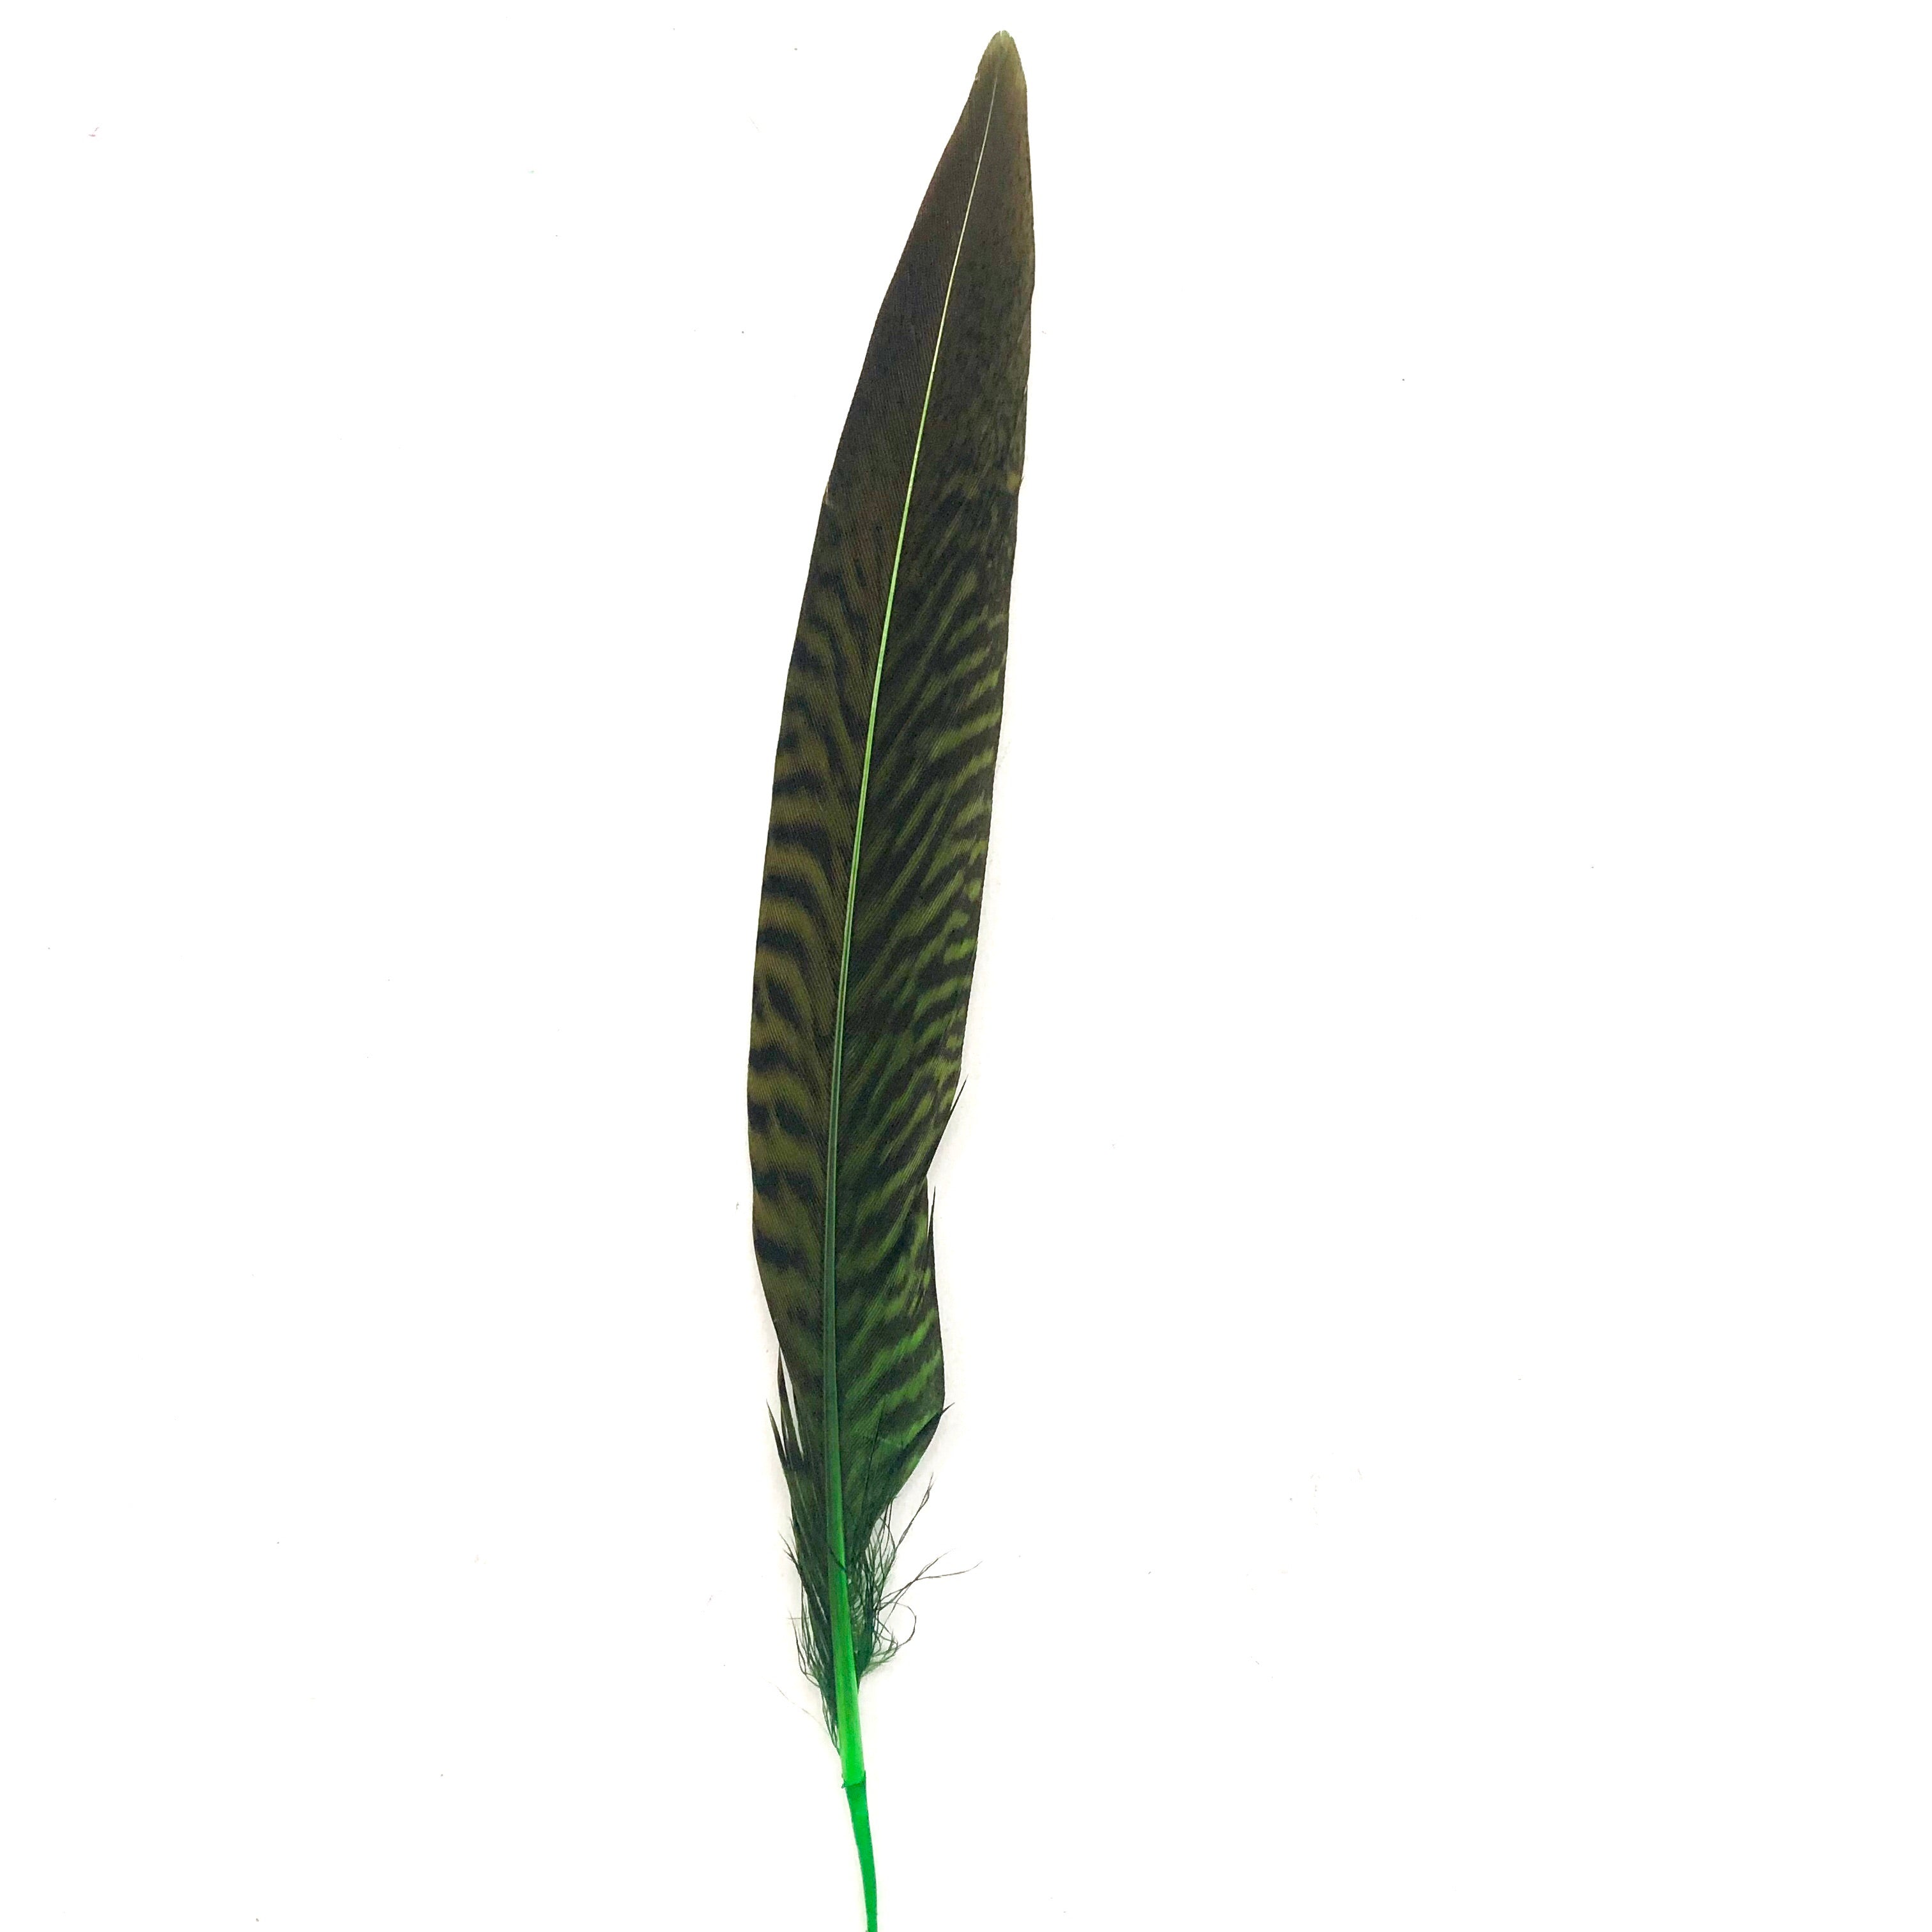 6" to 10" Golden Pheasant Side Tail Feather x 10 pcs - Lime Green